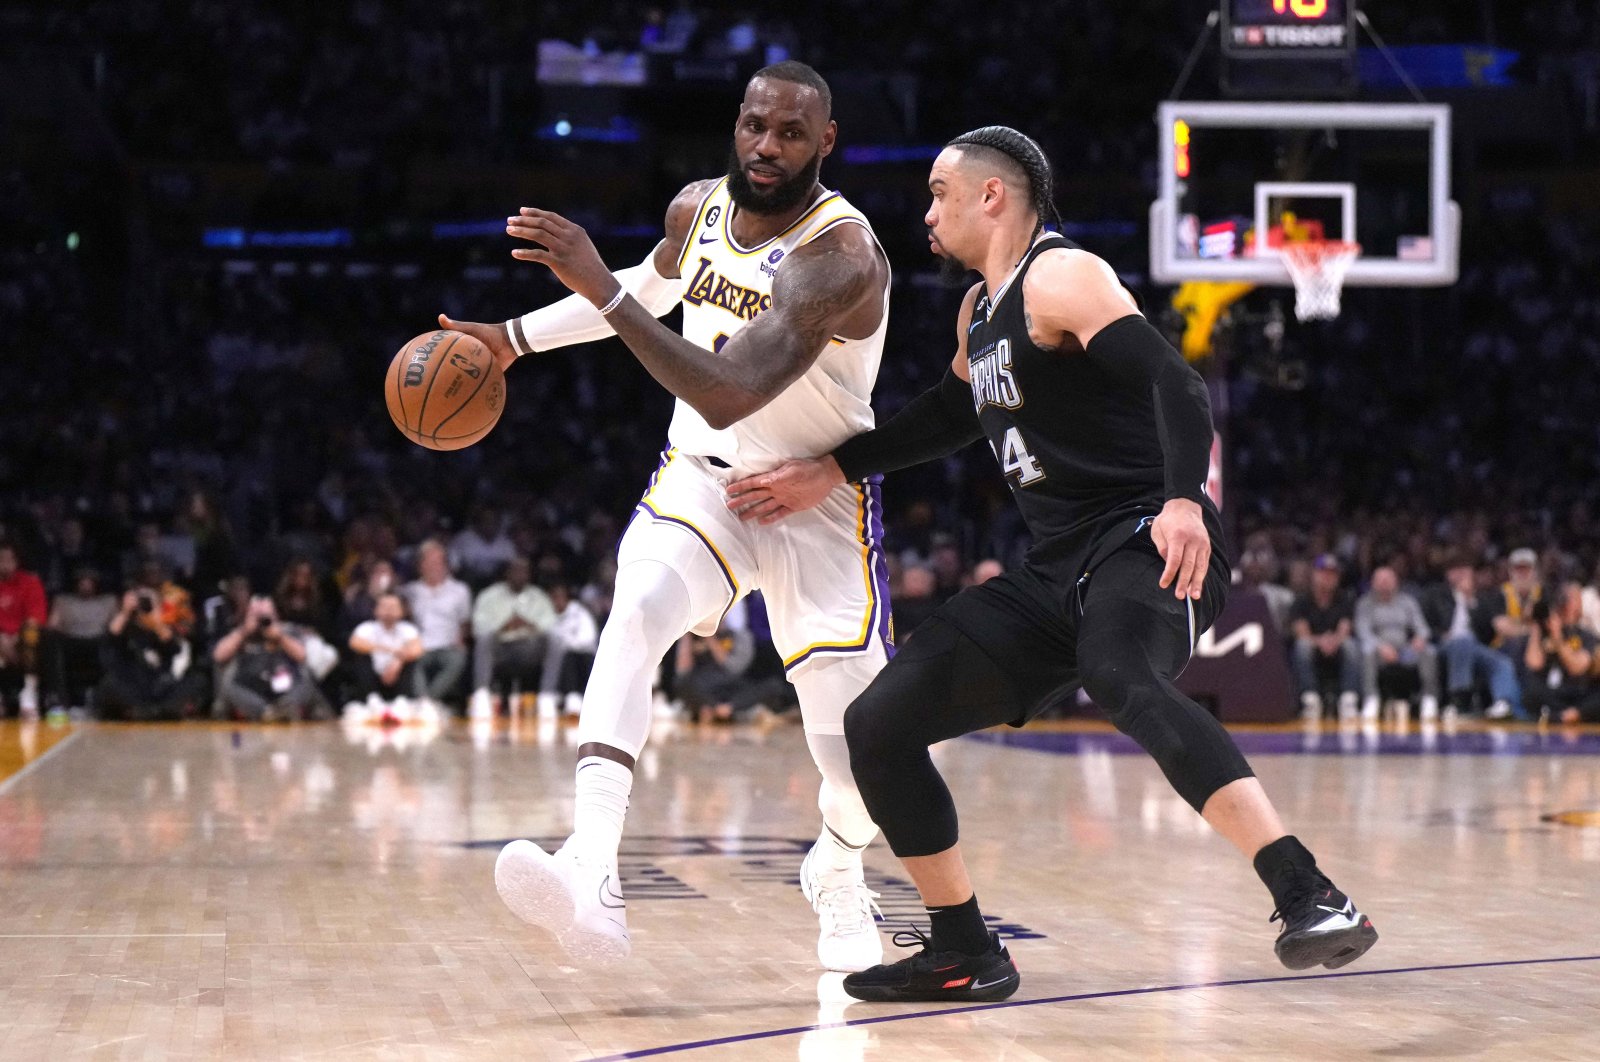 LeBron’s Lakers slam Grizzlies 111-101 to take 2-1 series lead